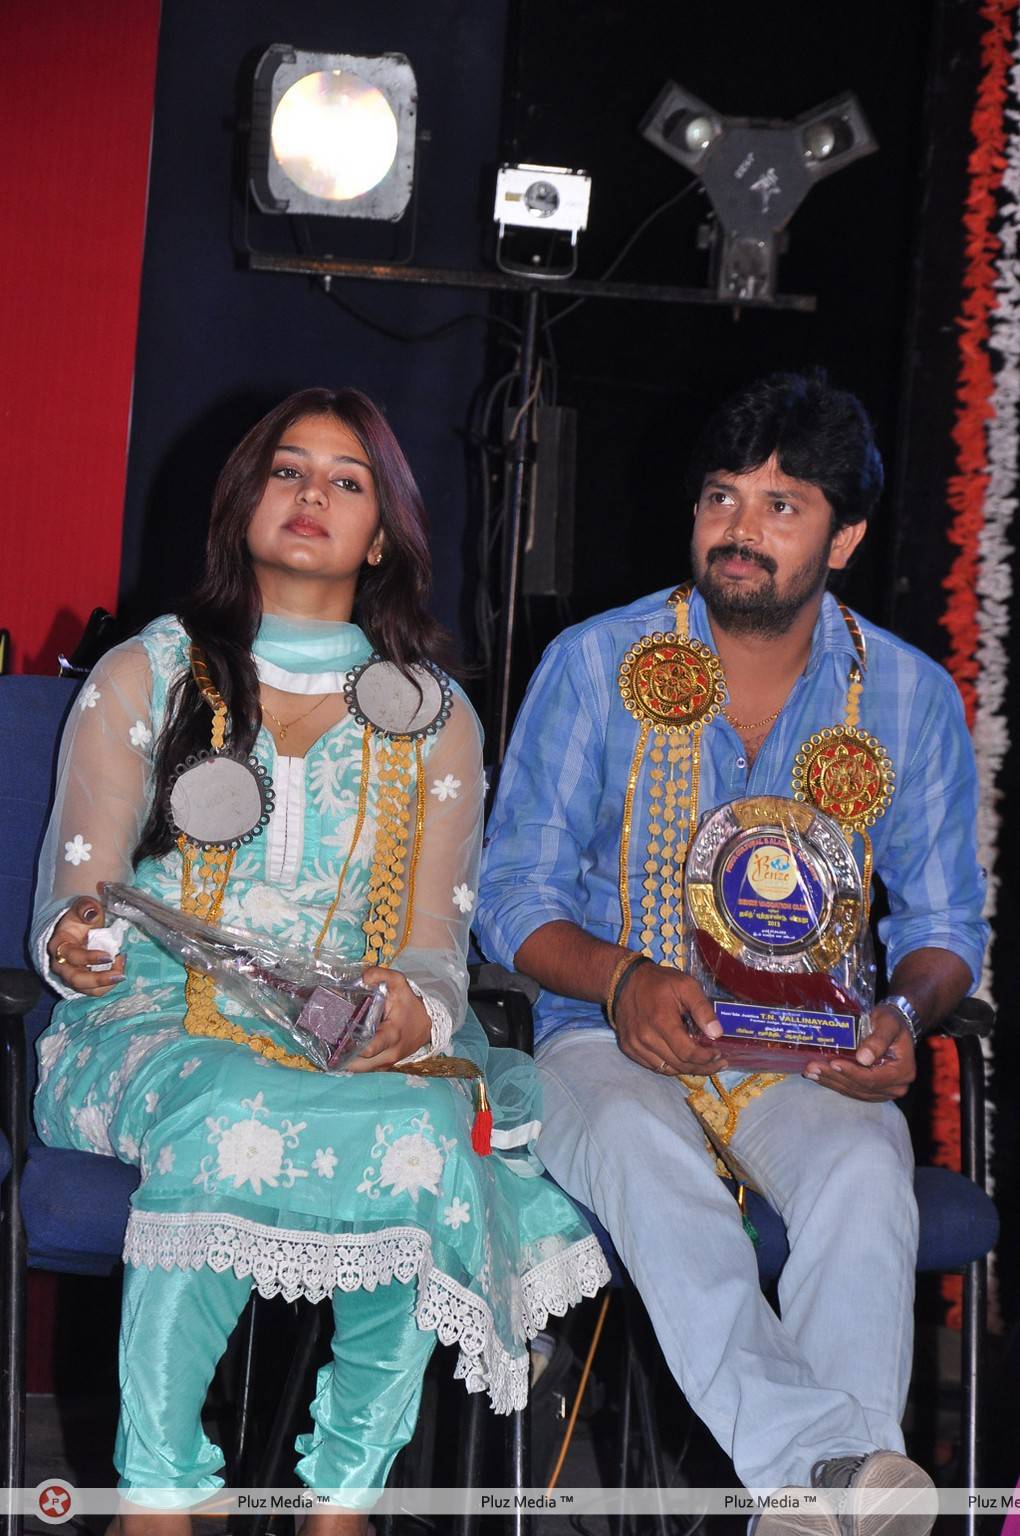 Benze Vaccations Club Awards 2013 Stills | Picture 427679